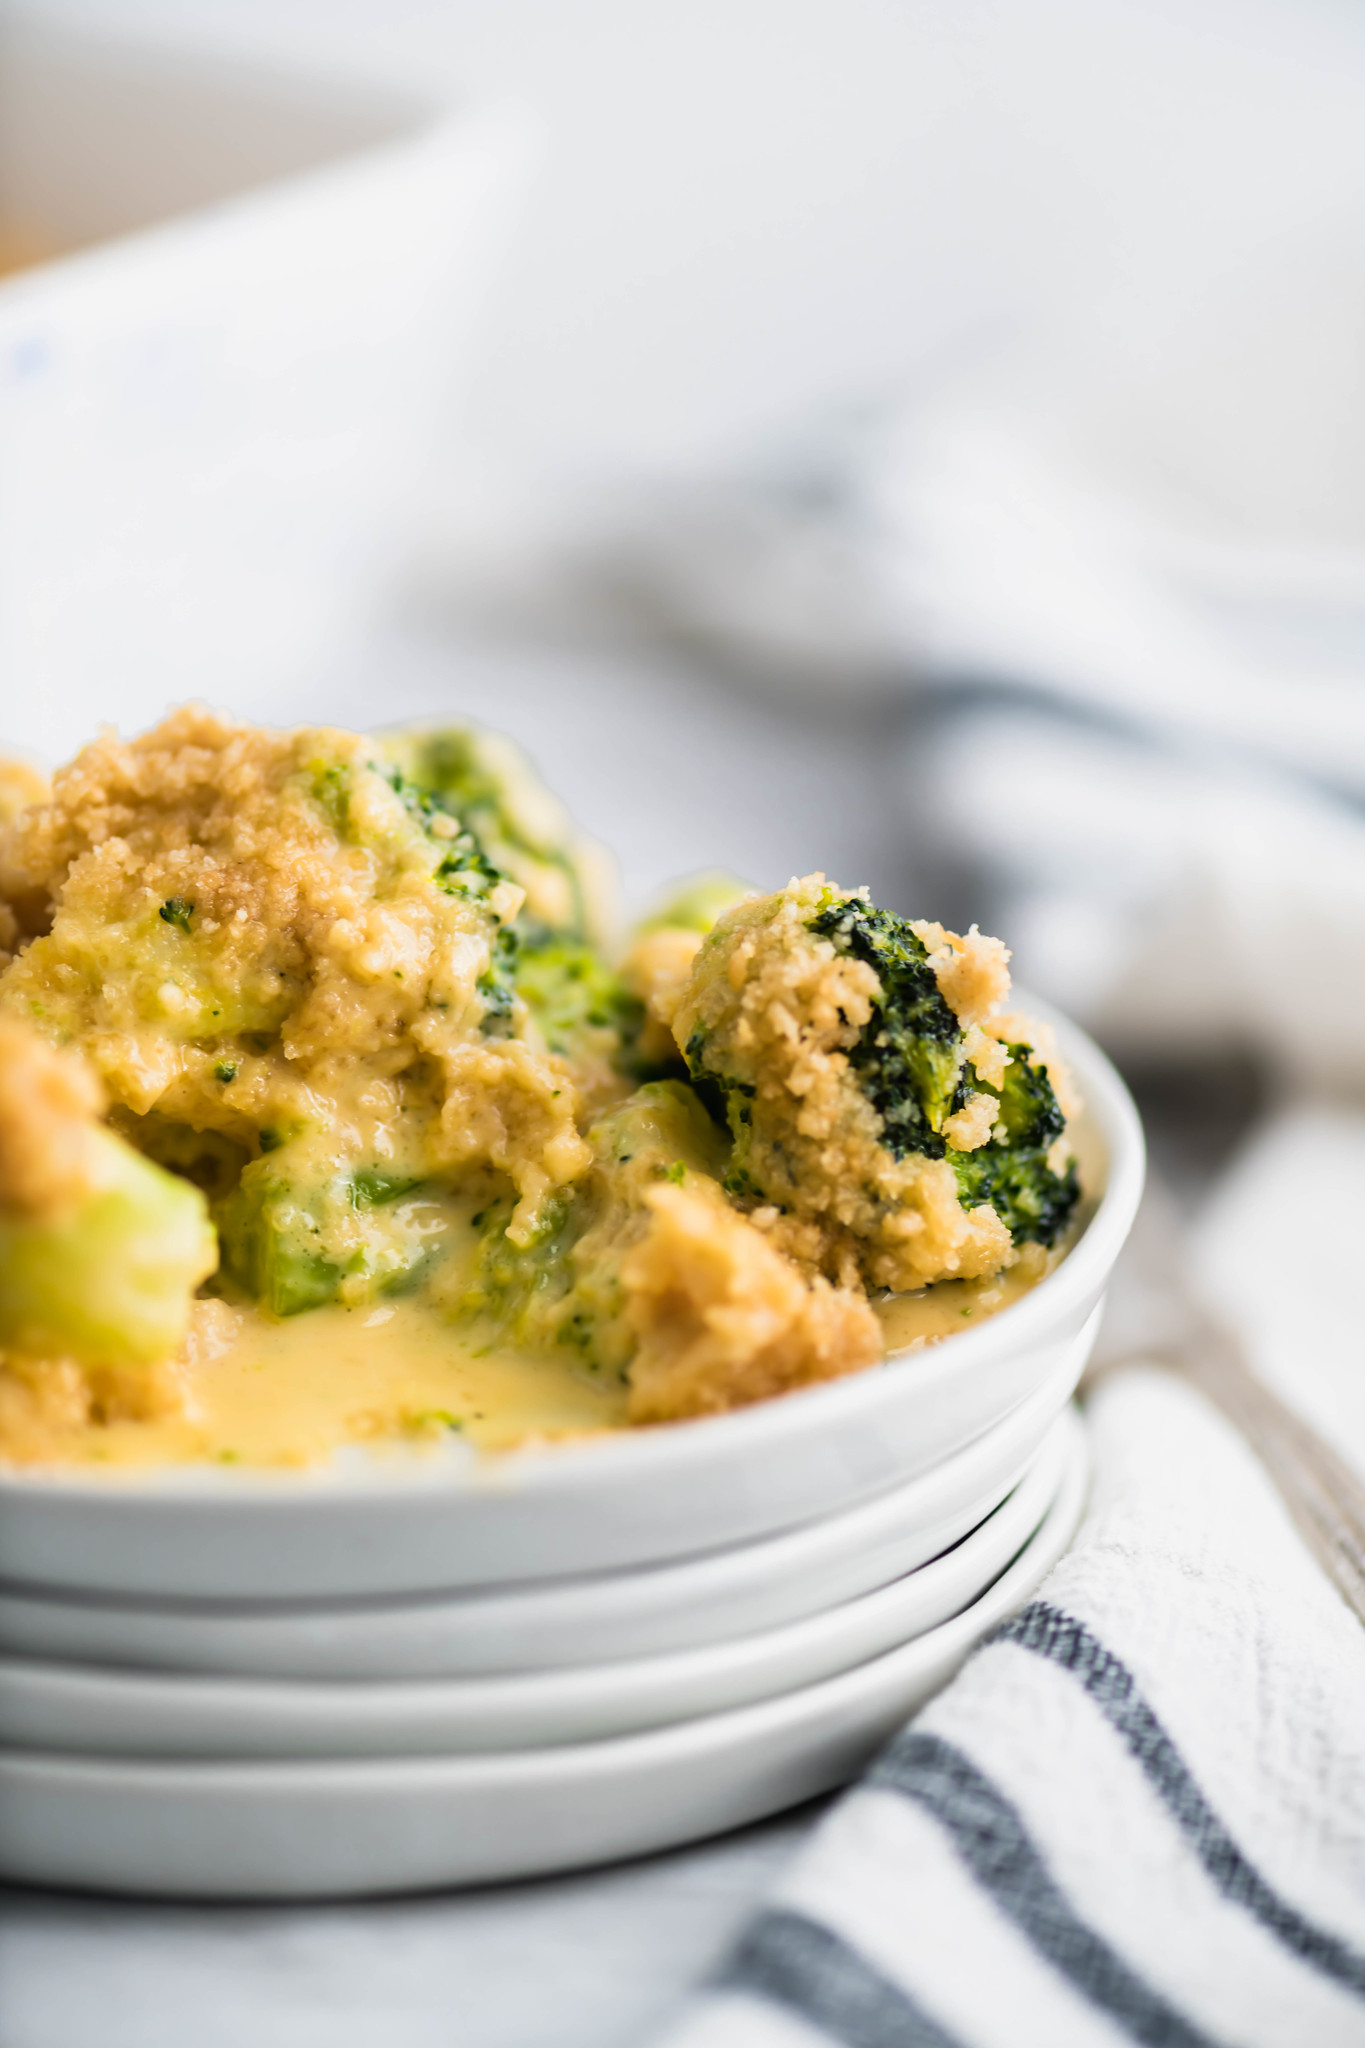 Broccoli Cheese Casserole is a super easy, totally addictive casserole that's perfect for the holidays. Only 4 ingredients needed for this cheesy vegetable side dish.